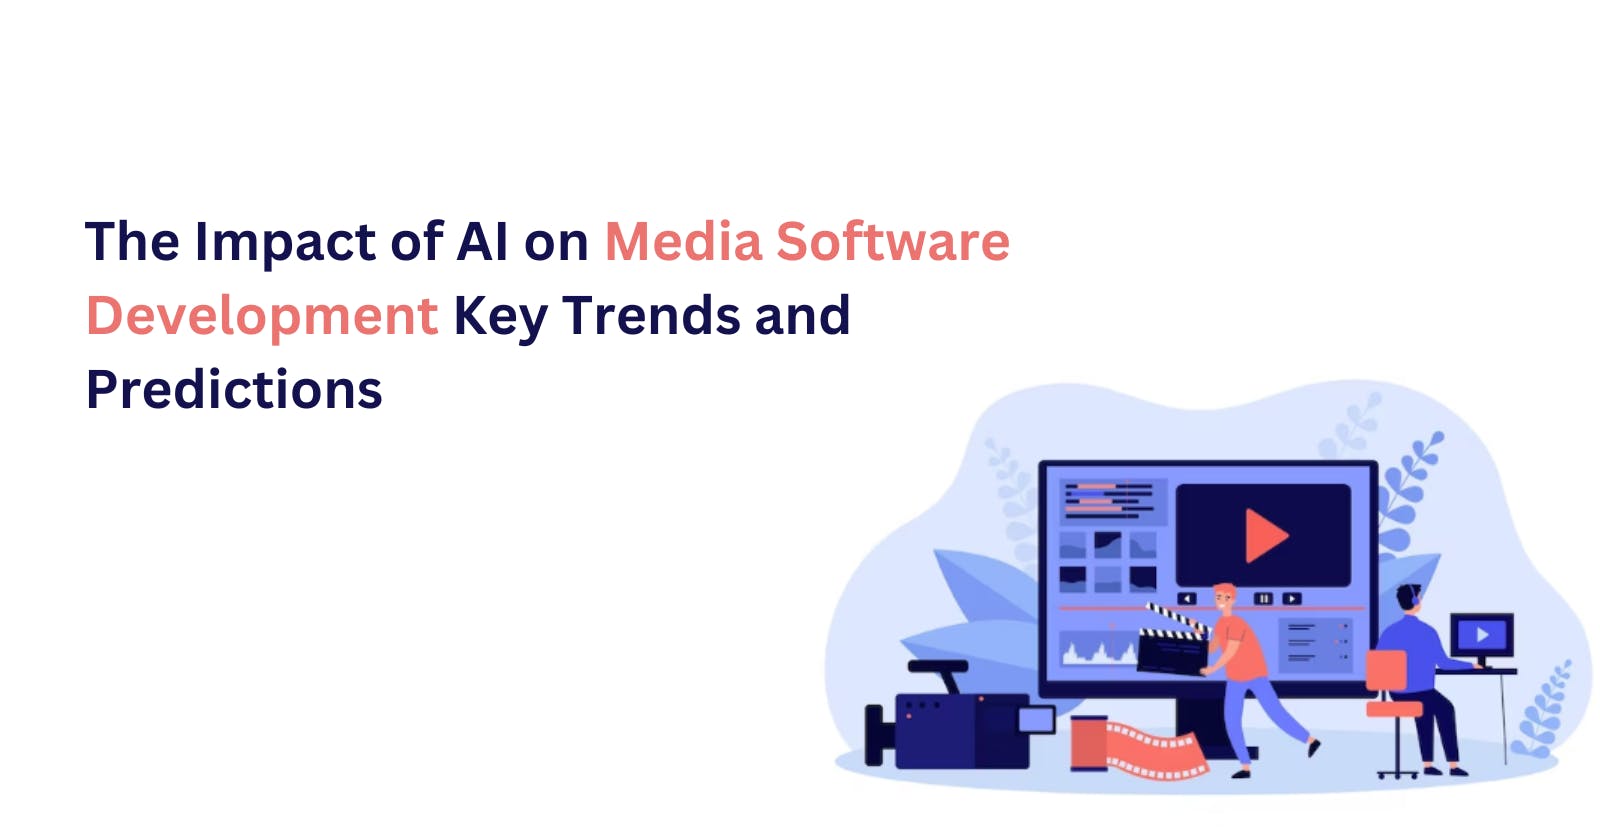 The Impact of AI on Media Software Development: Key Trends and Predictions